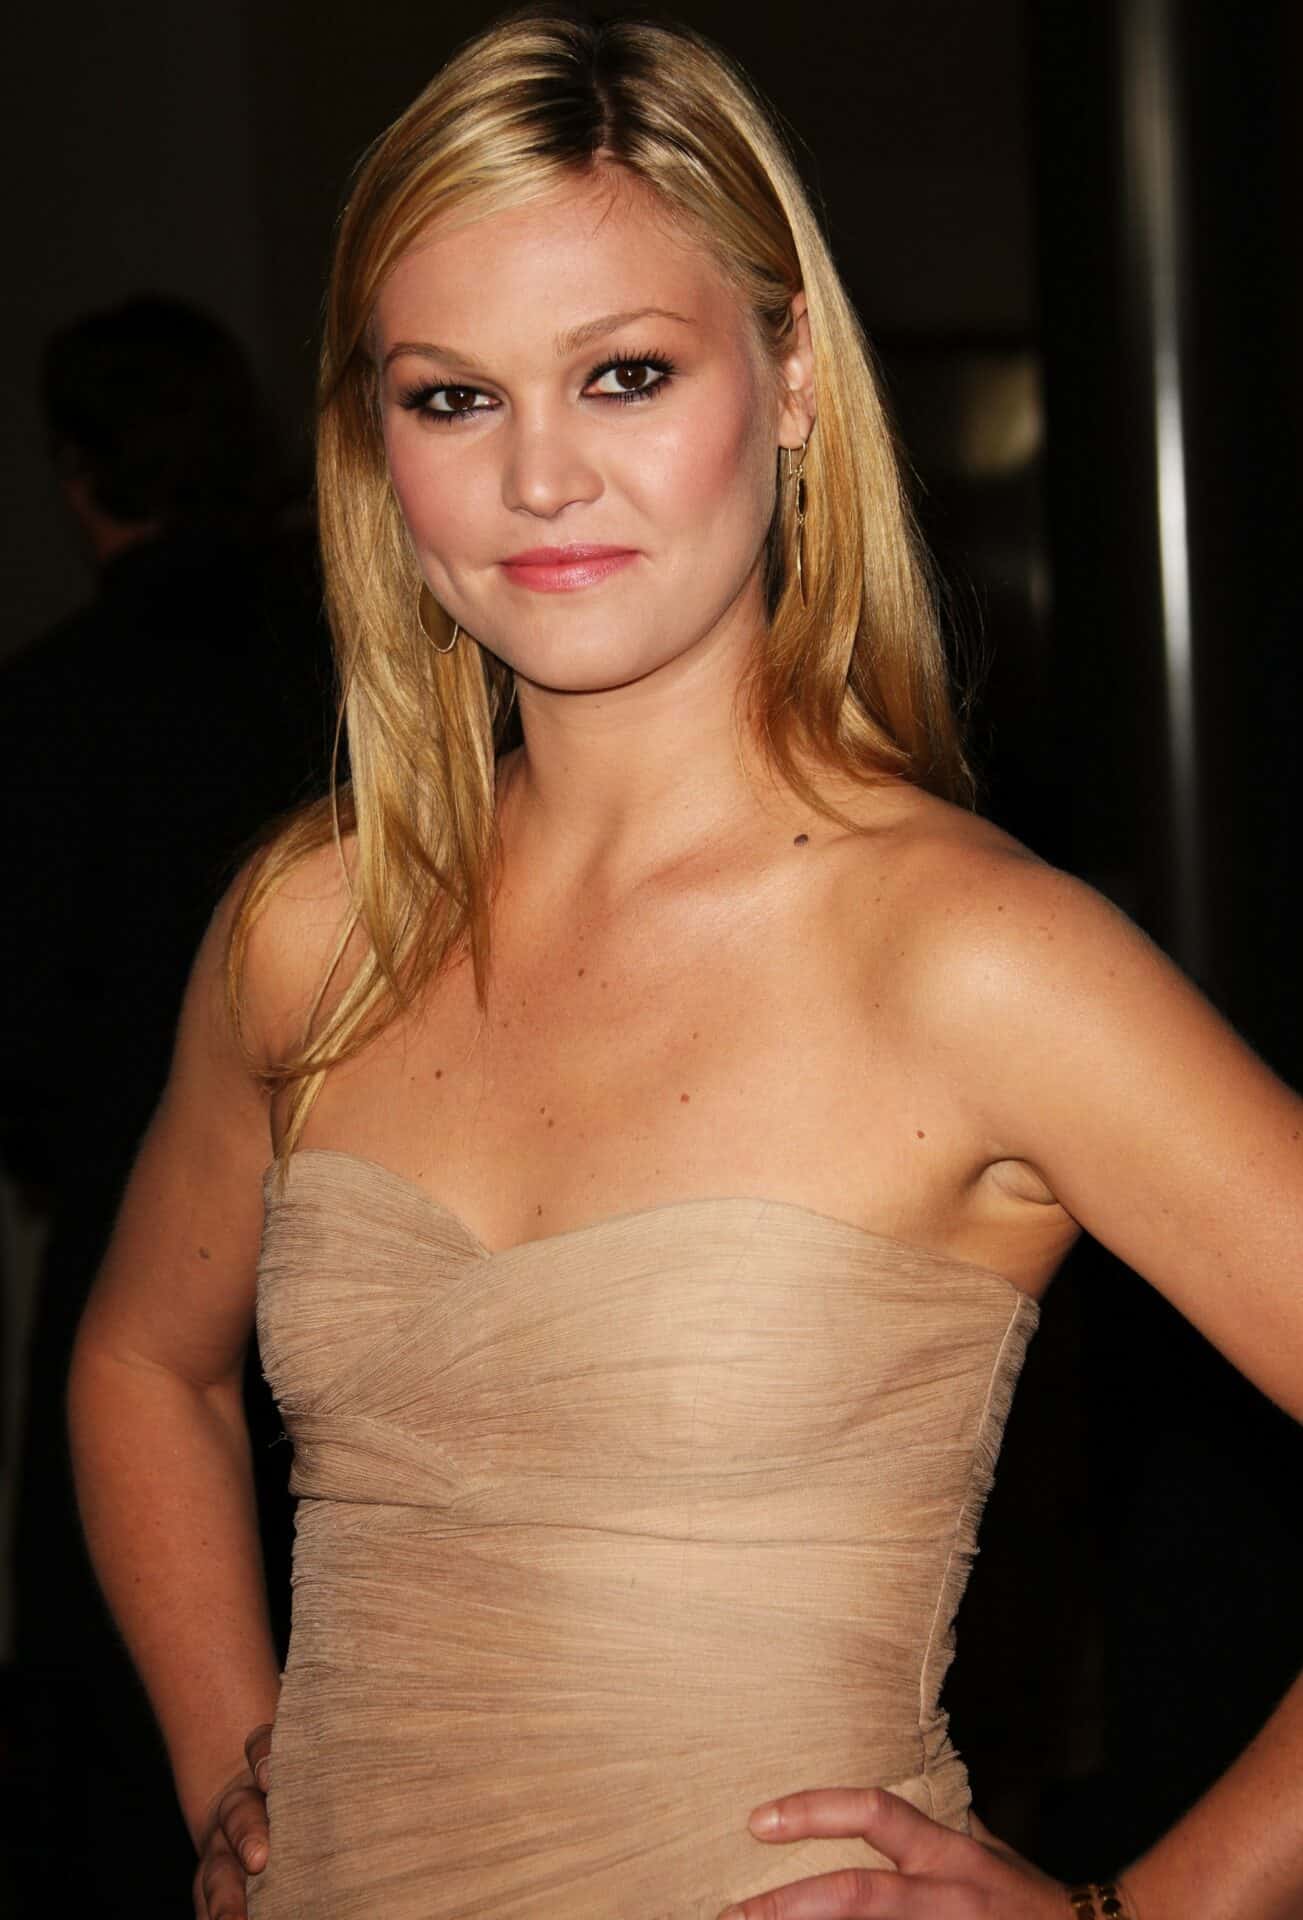 Julia Stiles was born in New York City on March 28, 1981